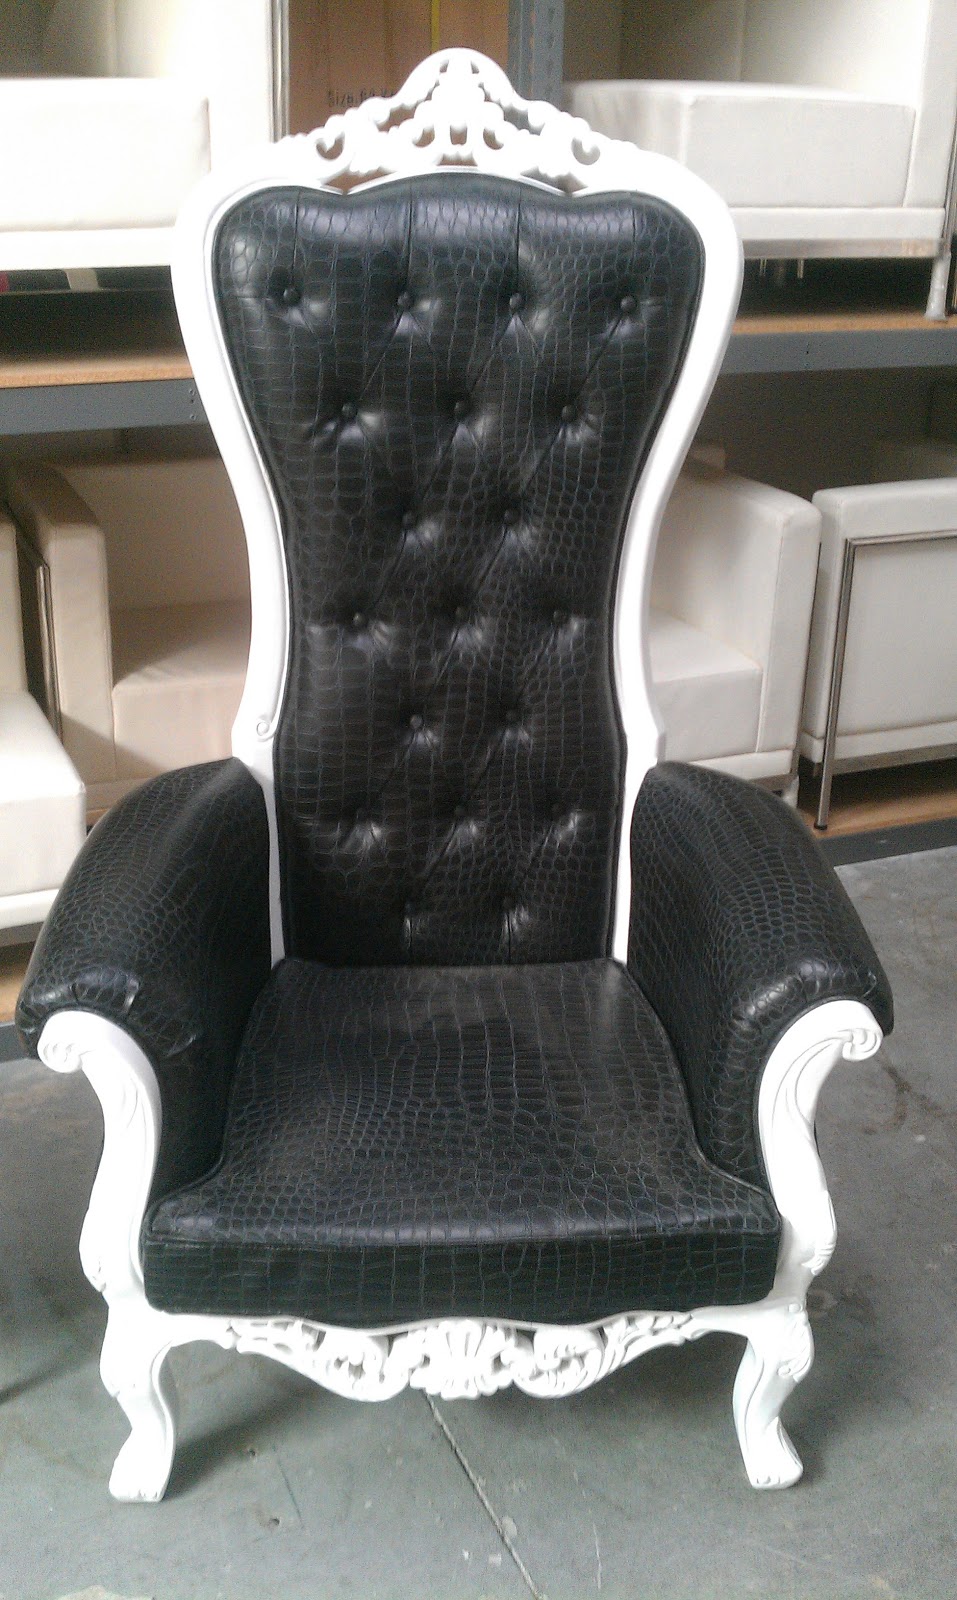 The Mod Spot: New Rental Kings Chairs - Thrones